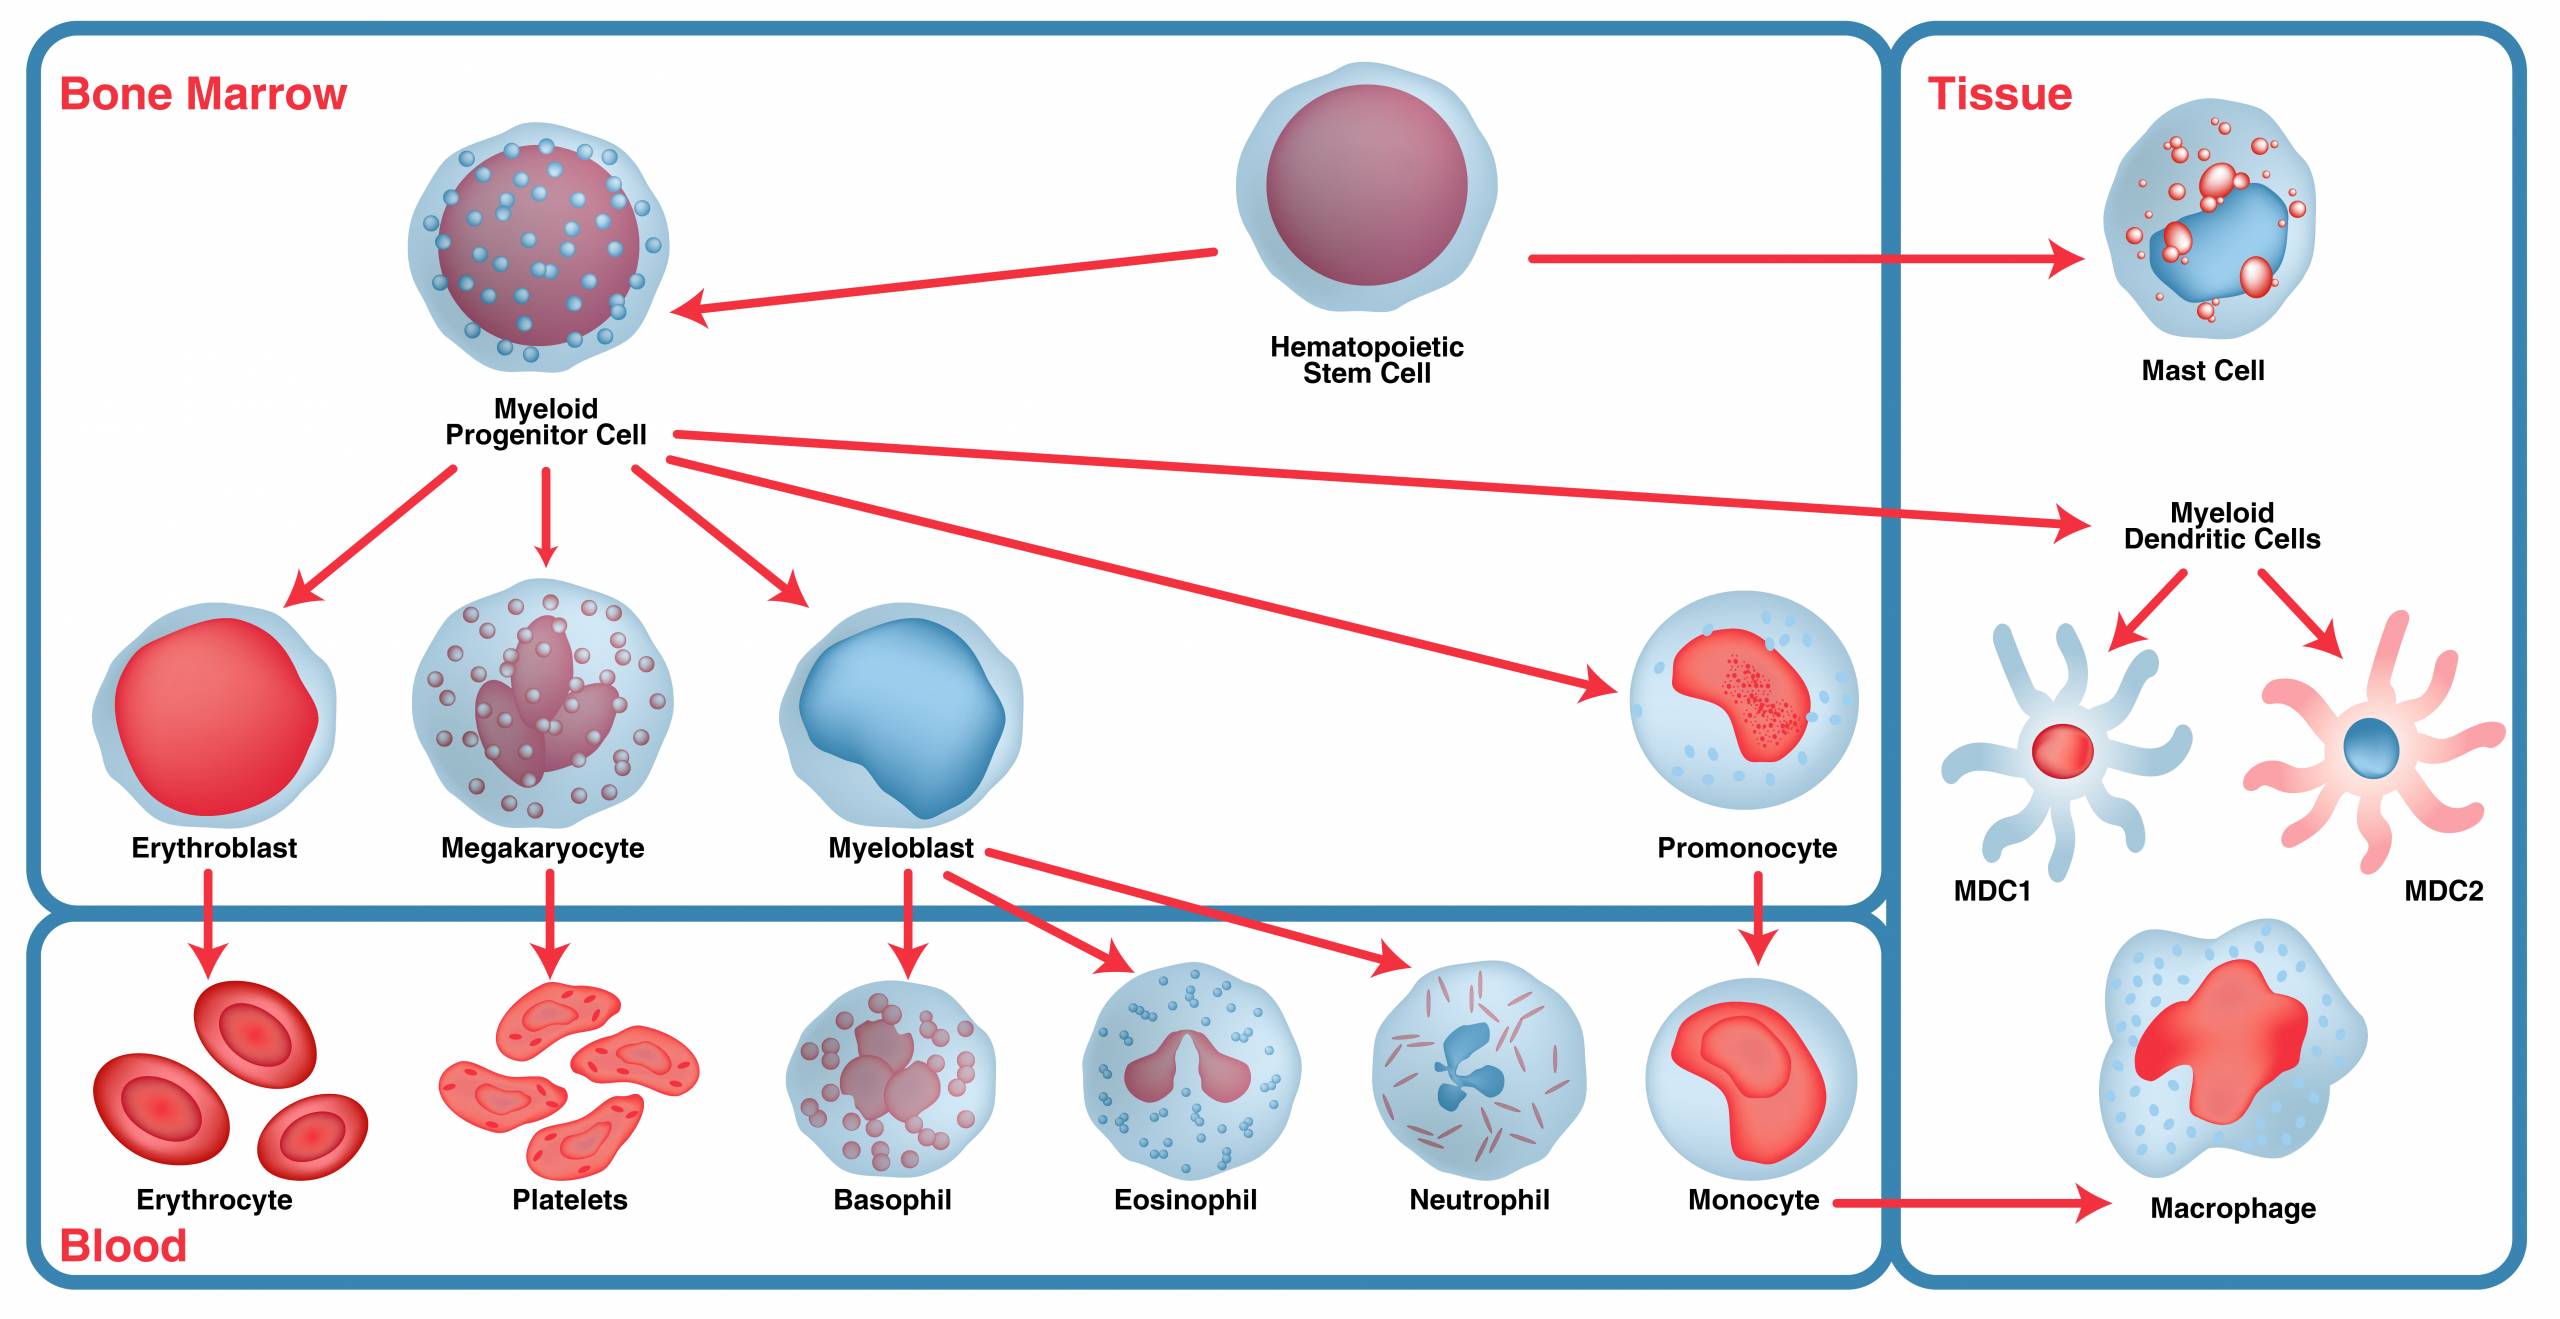 Immunophenotyping- Myeloid cell maturation